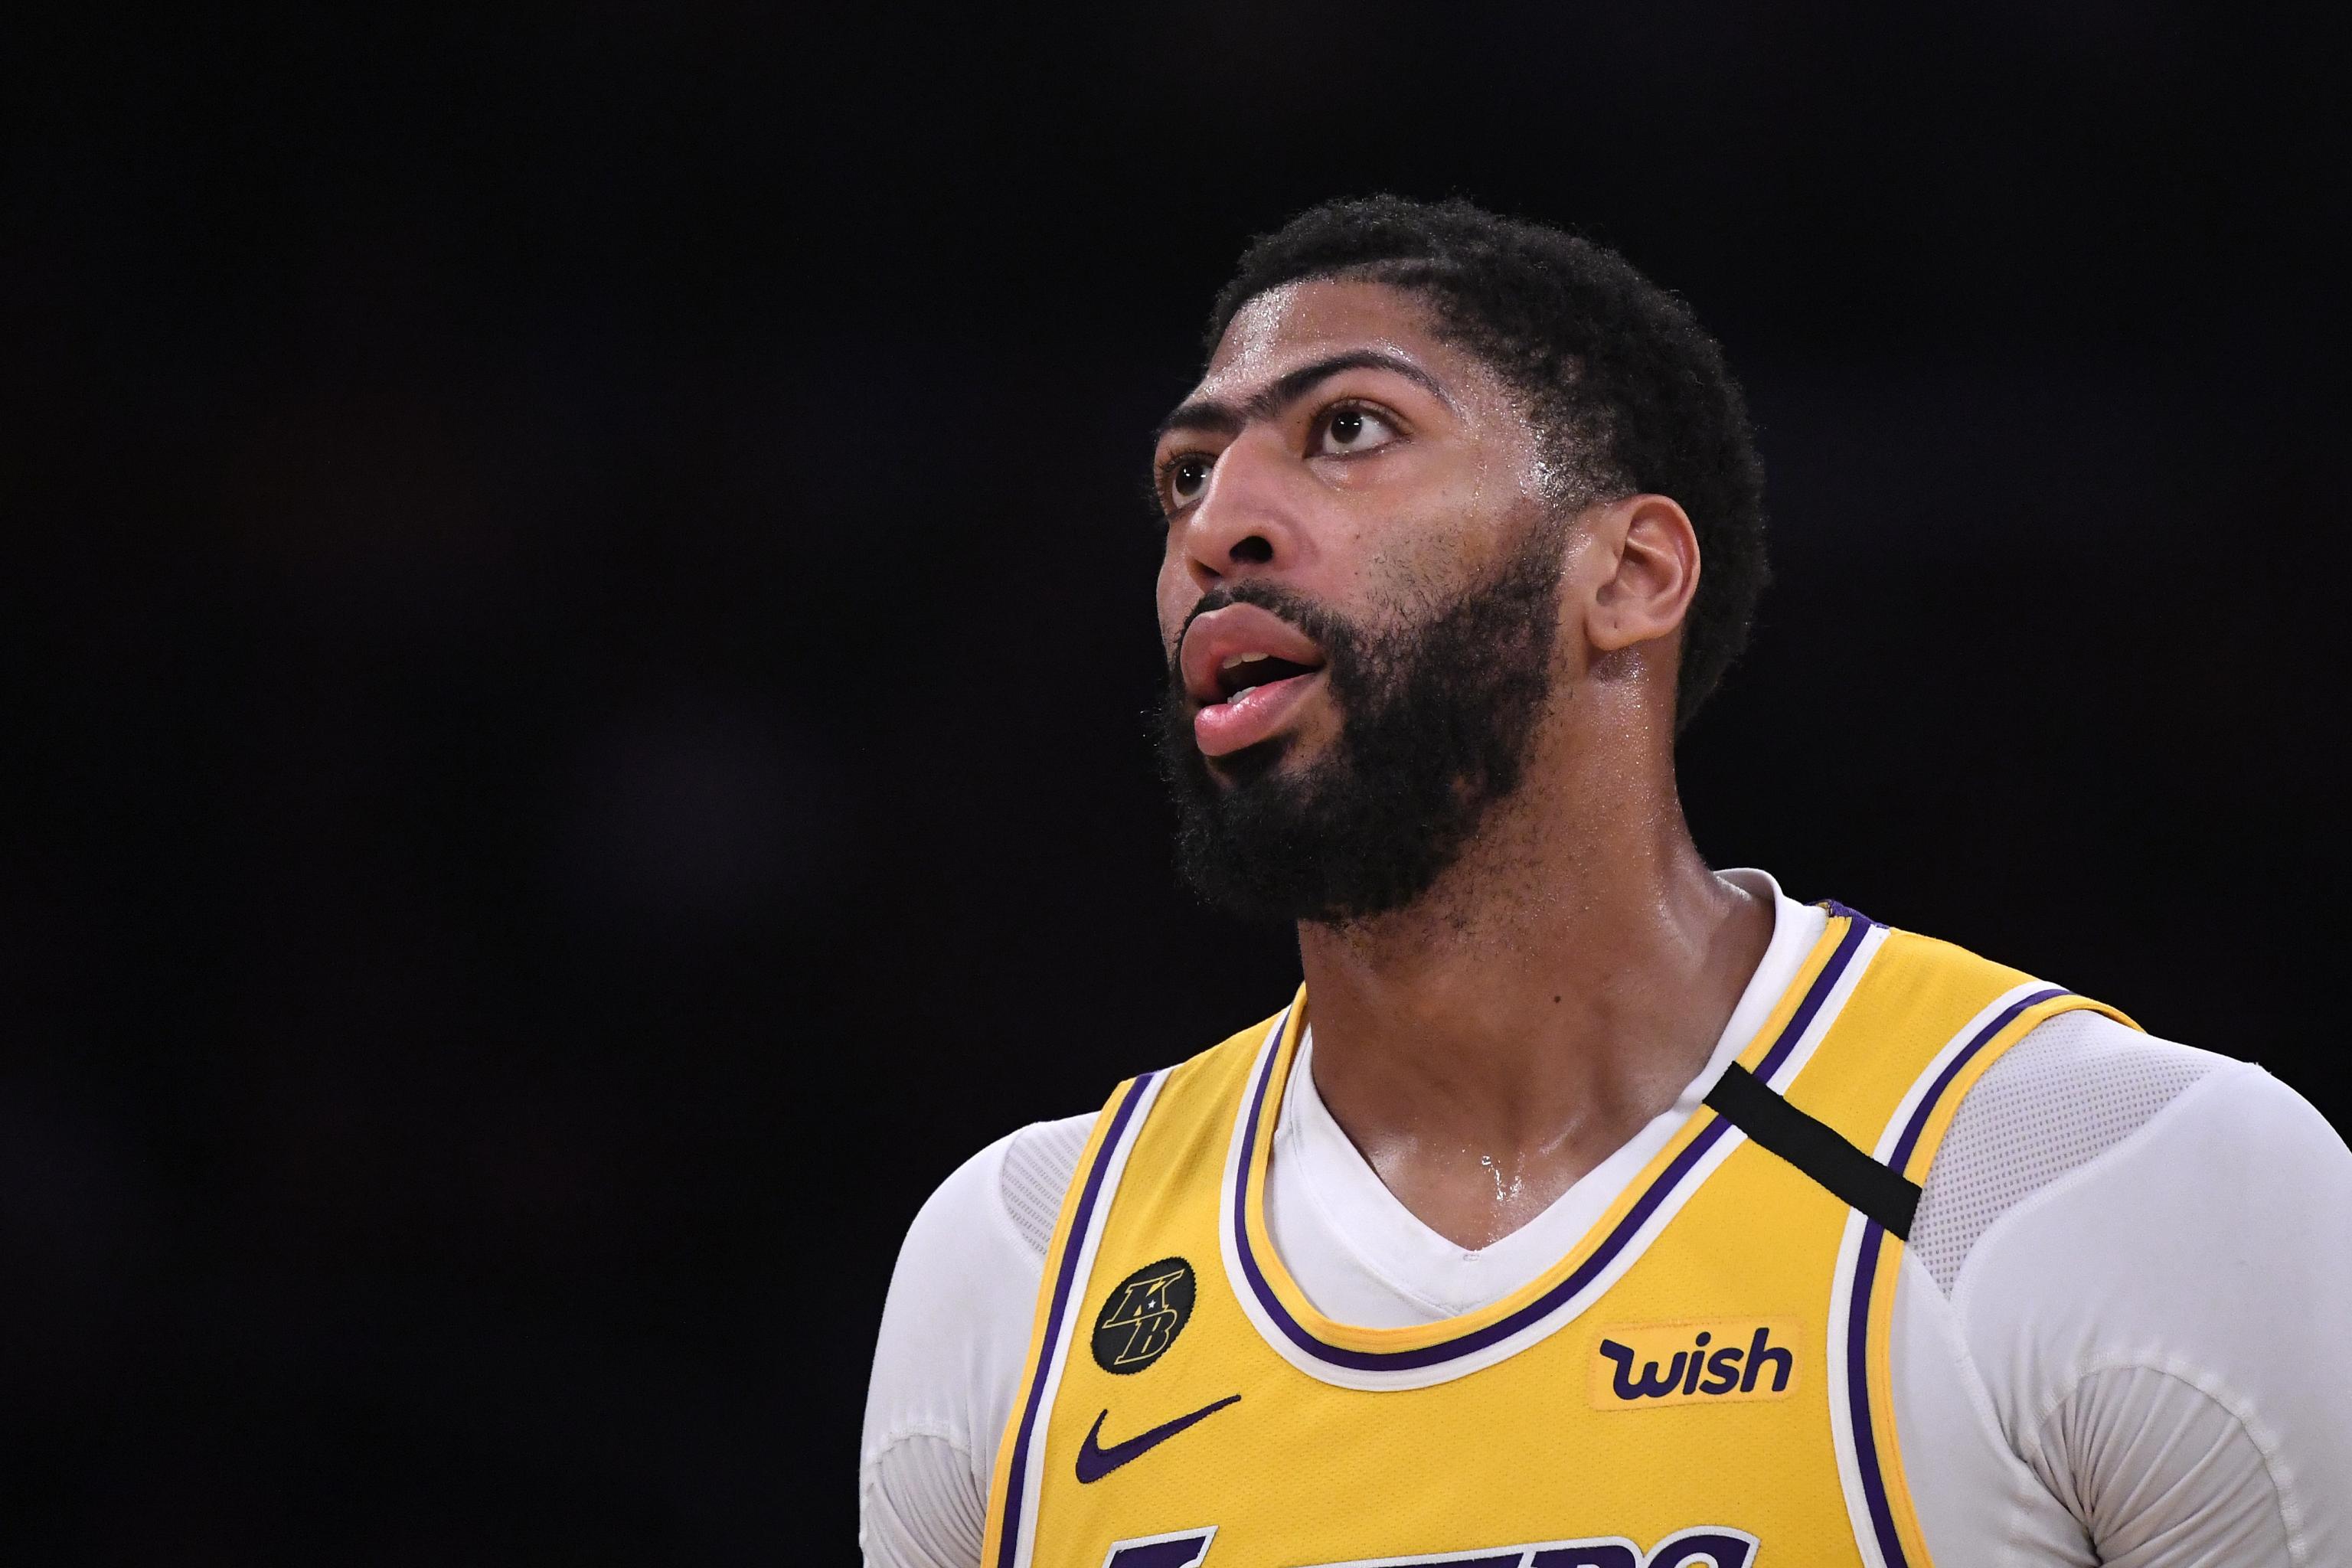 Lakers Anthony Davis Puts La Home On Sale For 7 995m Ahead Of 2020 Free Agency Bleacher Report Latest News Videos And Highlights